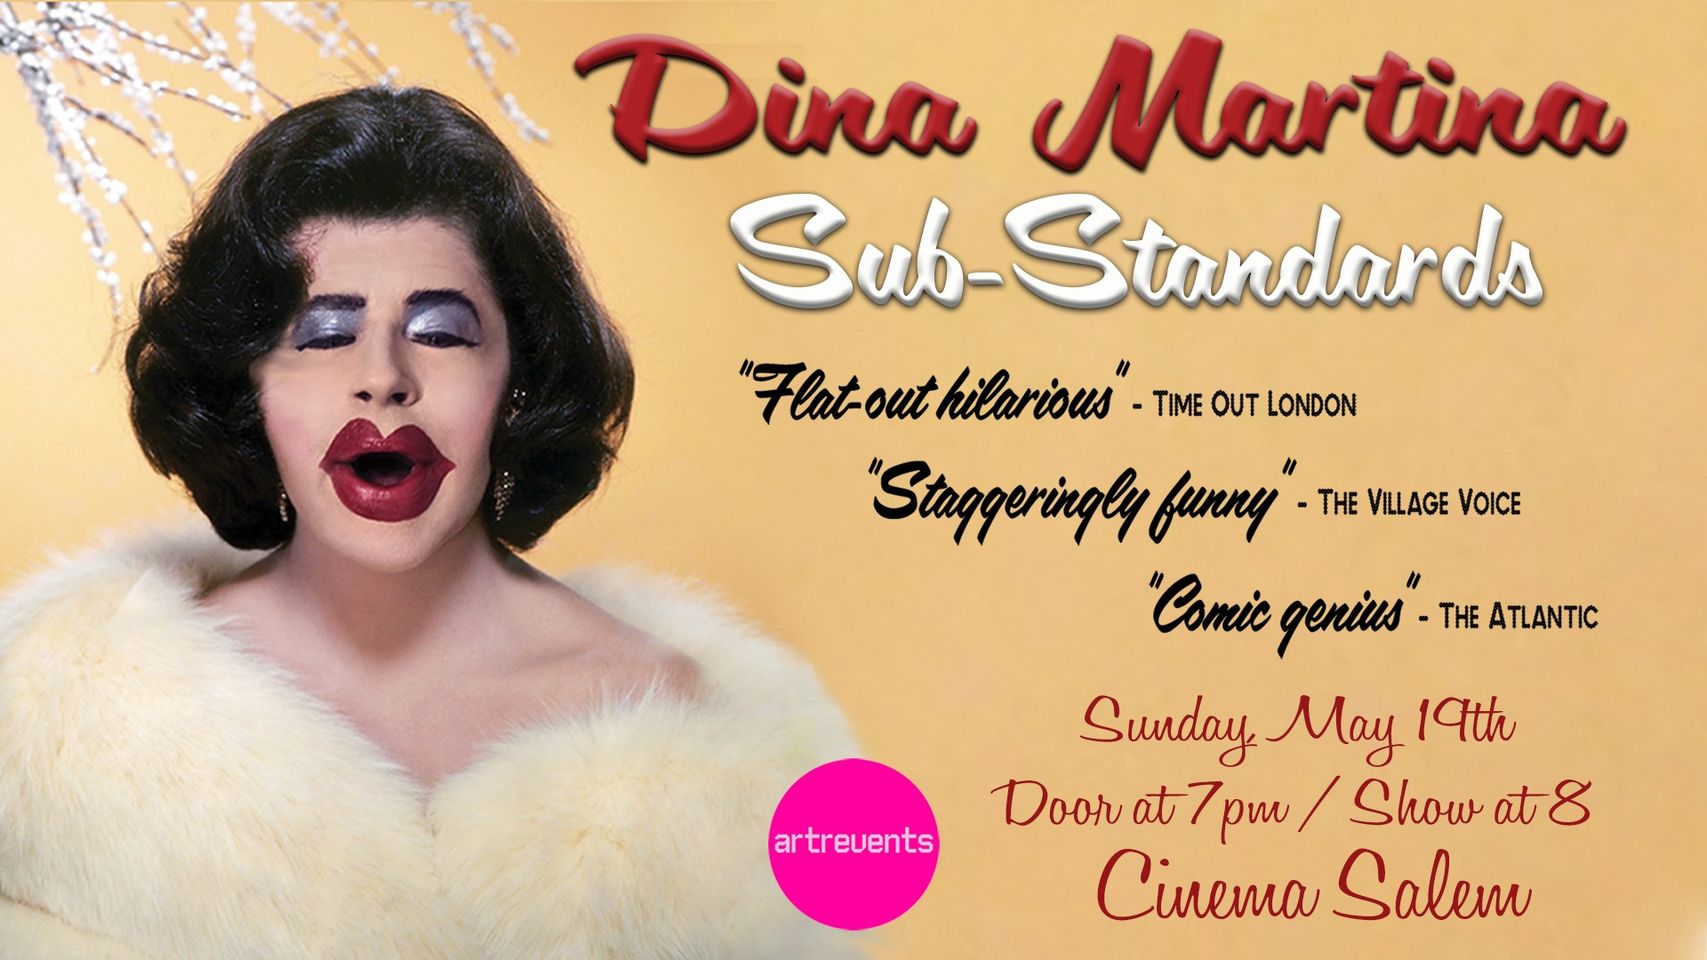 Boost your promotions with an eye-catching poster for Dina Martina's "Sub-Standards" show. The poster will highlight her stunning portrait, important show details, and rave reviews. This engaging visual aid can significantly raise awareness about the event and attract potential audience members.